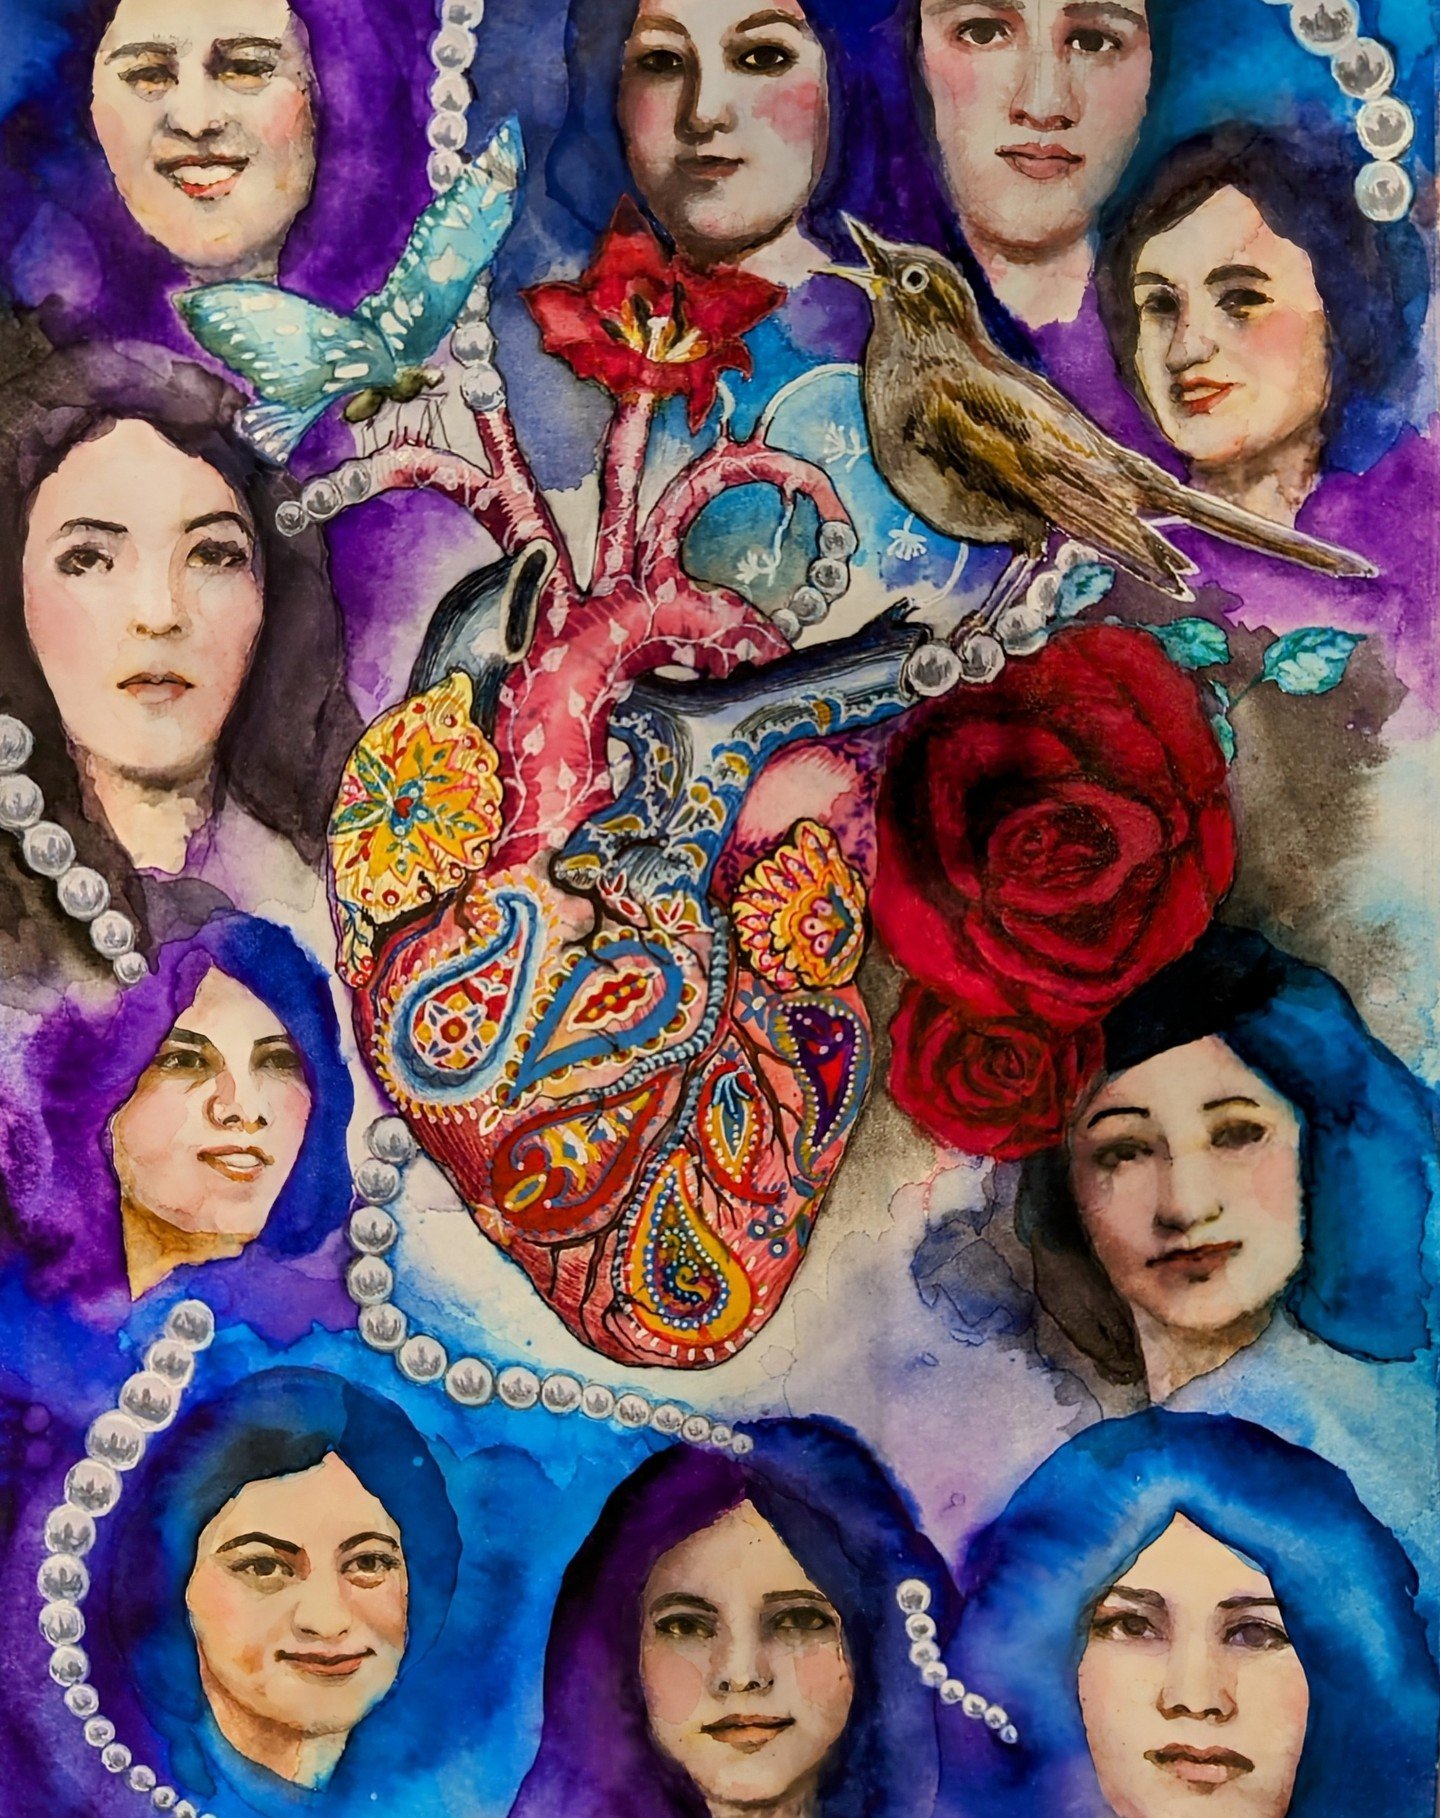 Beautiful artwork titled &ldquo;With One Heart&rdquo; by Trish de Muth, exhibited at the &ldquo;OurStoryIsOne&rdquo; art exhibition in New Zealand. Trish's mixed media masterpiece beautifully encapsulates the essence of unity, sacrifice, and spiritua